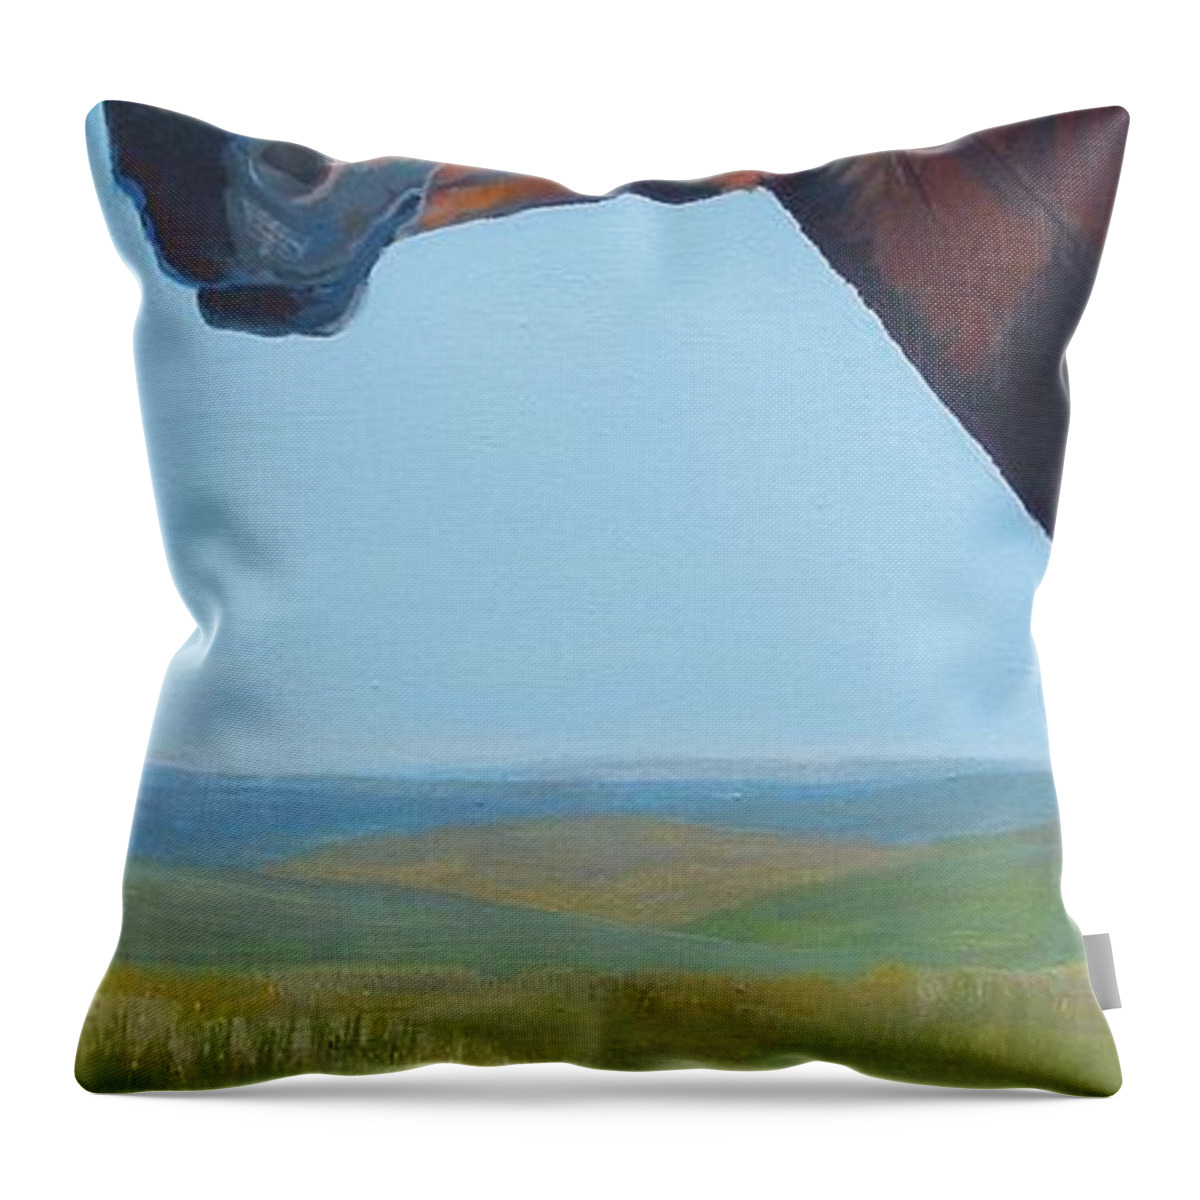 Horse Throw Pillow featuring the painting Horse Head Painting by Mike Jory